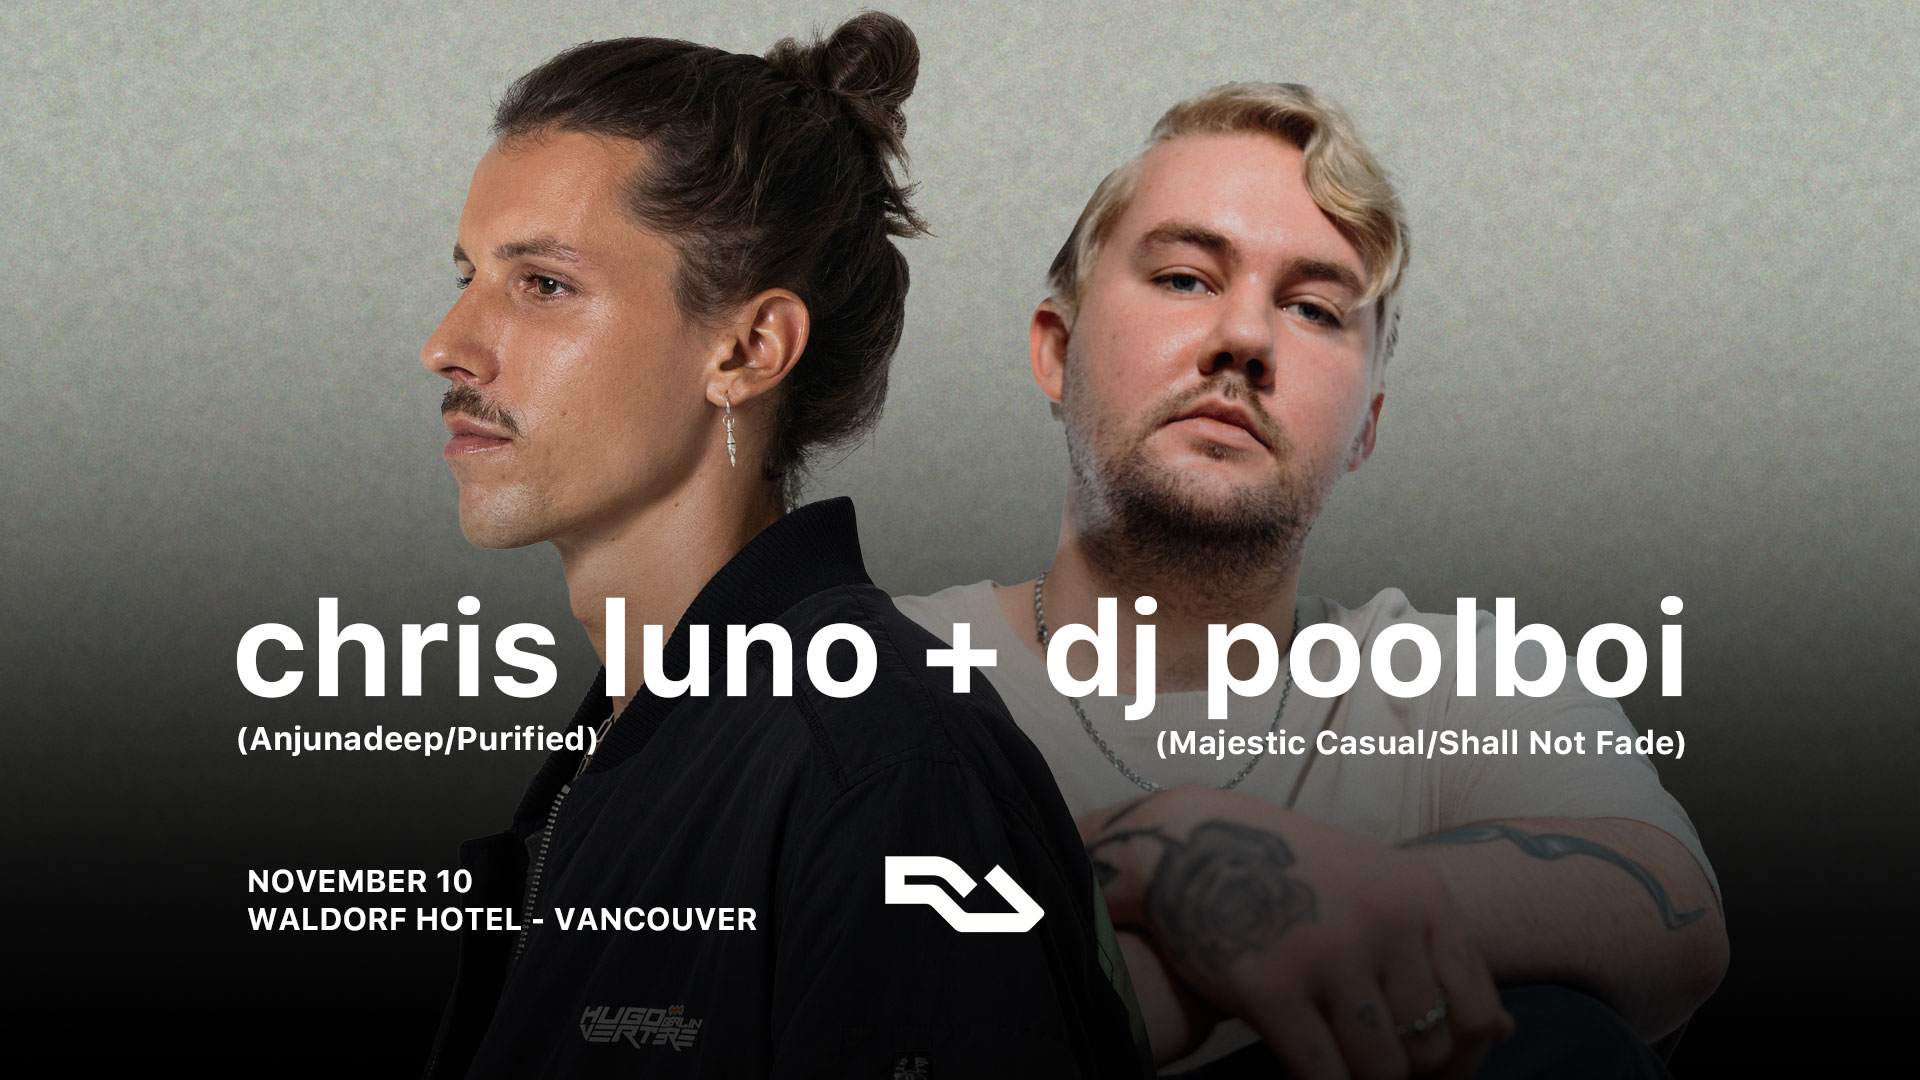 SOLD OUT - Chris Luno (Anjunadeep/Purified), dj poolboi (Majestic Casual/Shall Not Fade)  - Página frontal